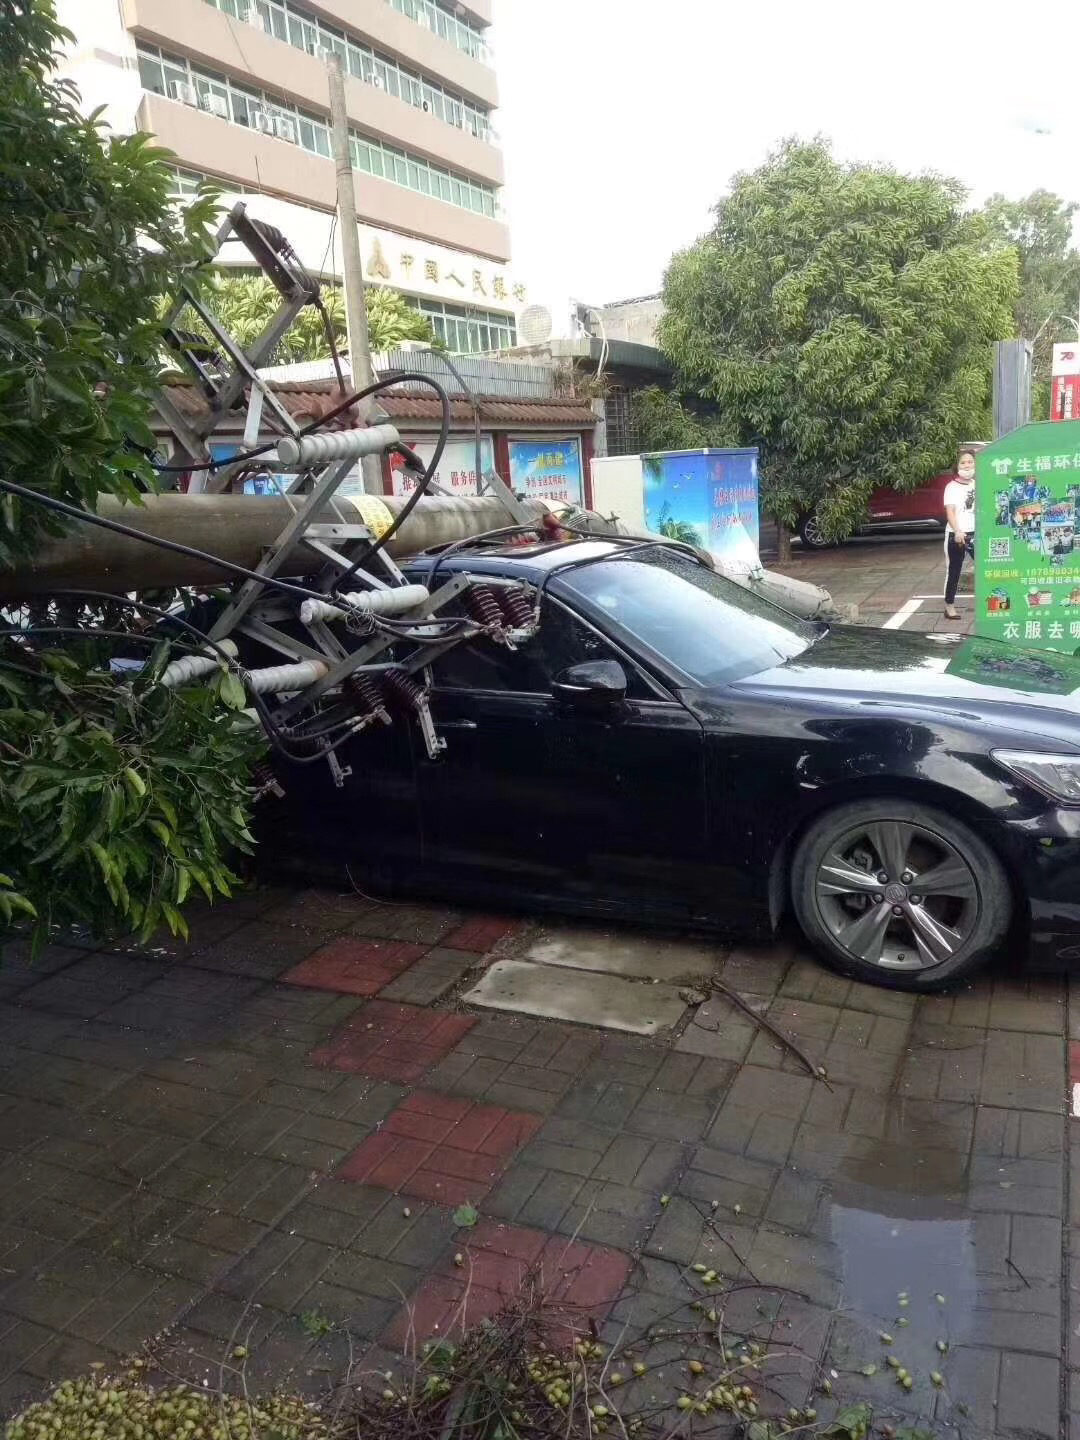 A car is hit by a utility pole blown down by a sudden tornado in Nada town of Danzhou, South China's Hainan province, Aug 29, 2019.